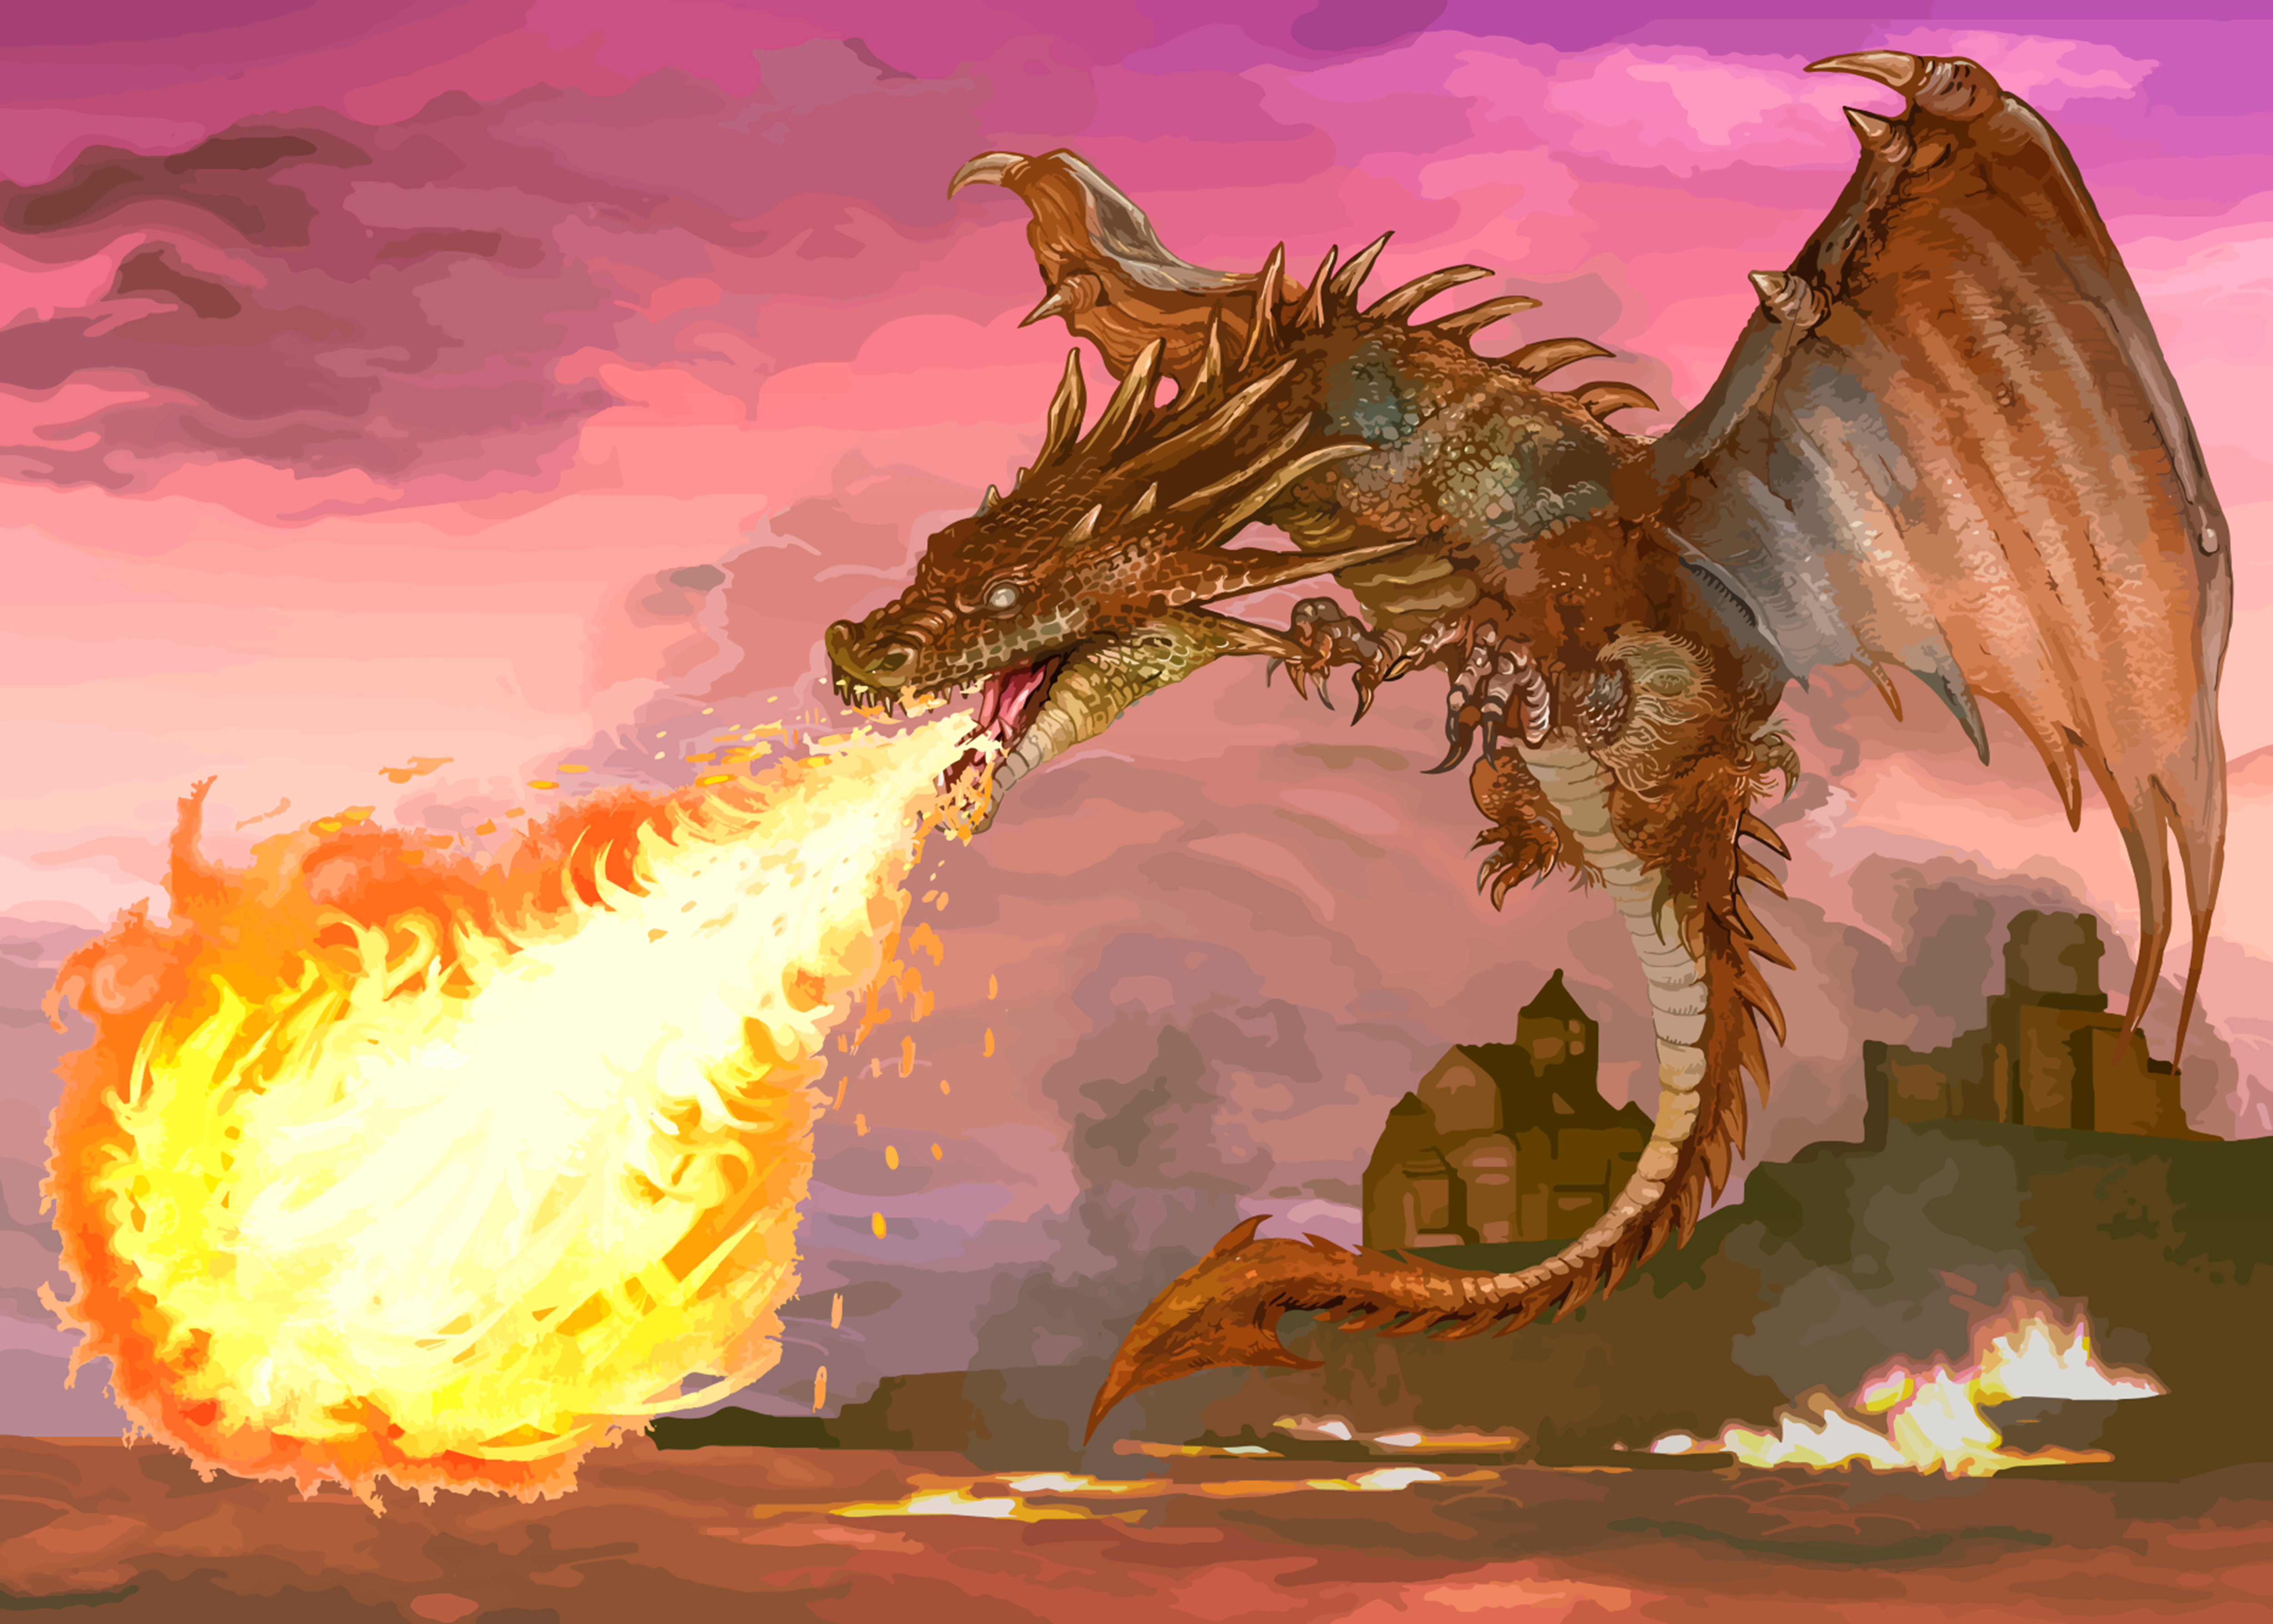 Image of a fire breathing Dragon hovering over a castle.